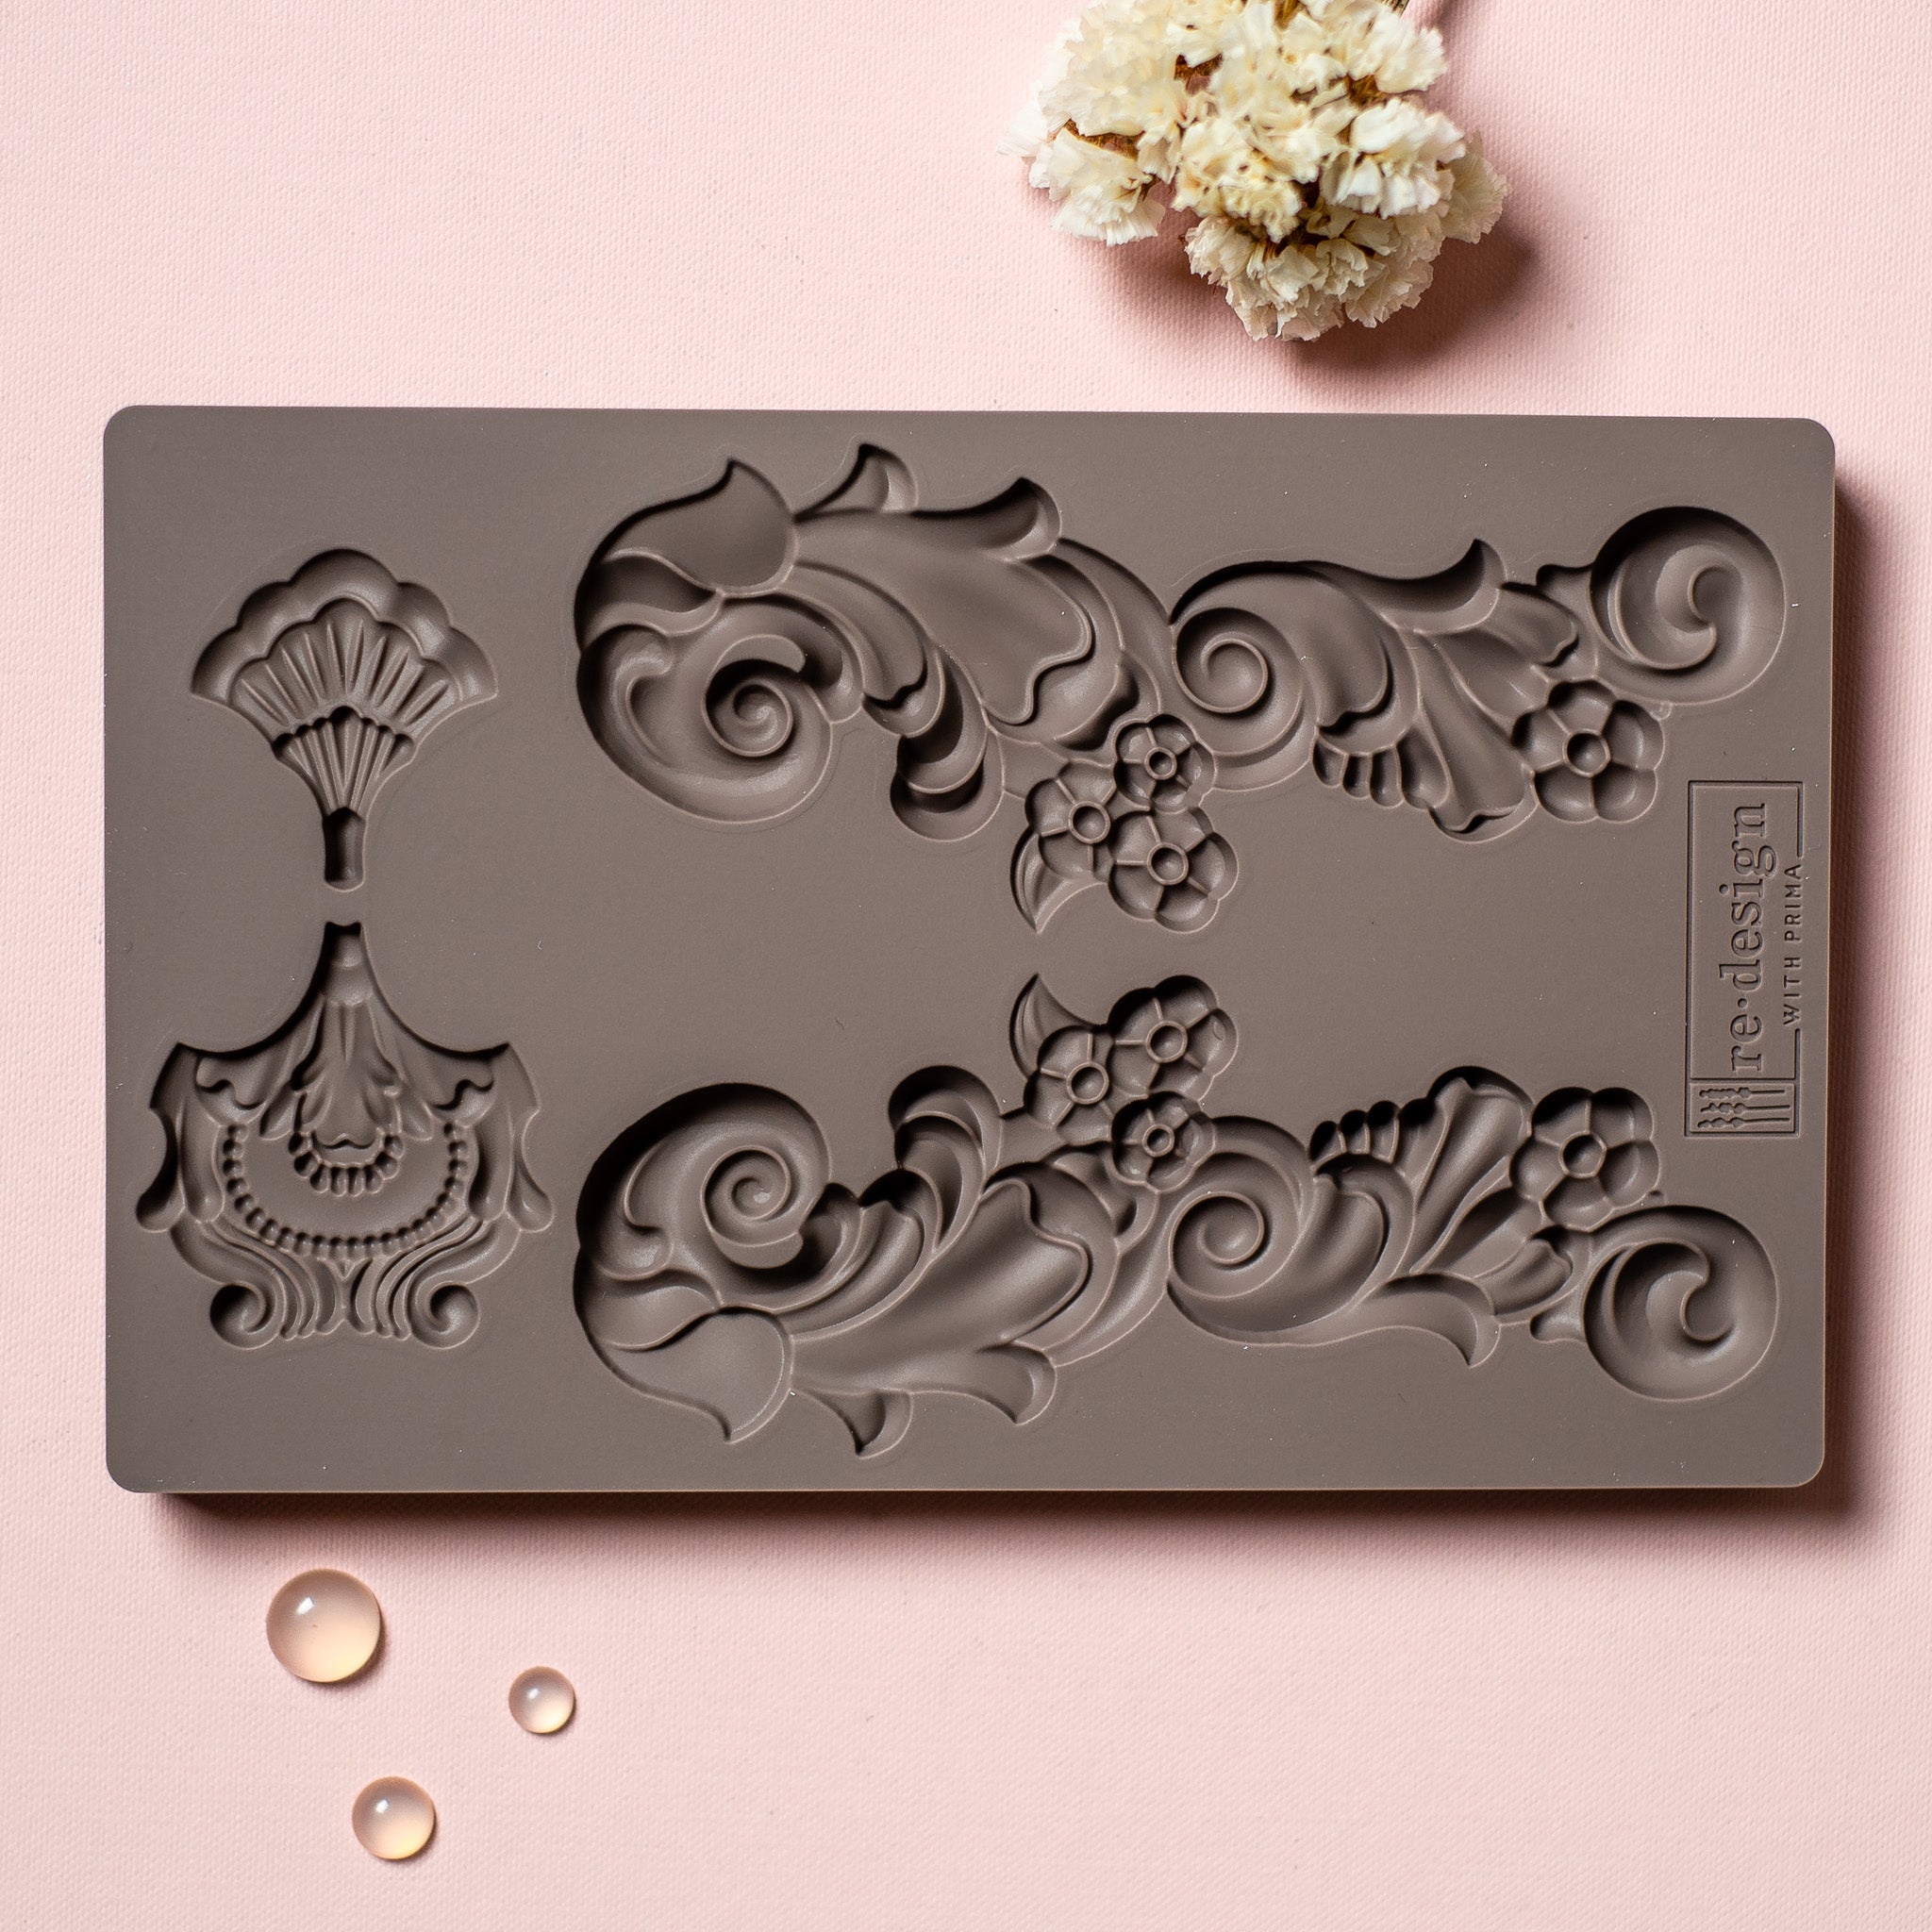 Groeneville Crest mold tray on a pink background.